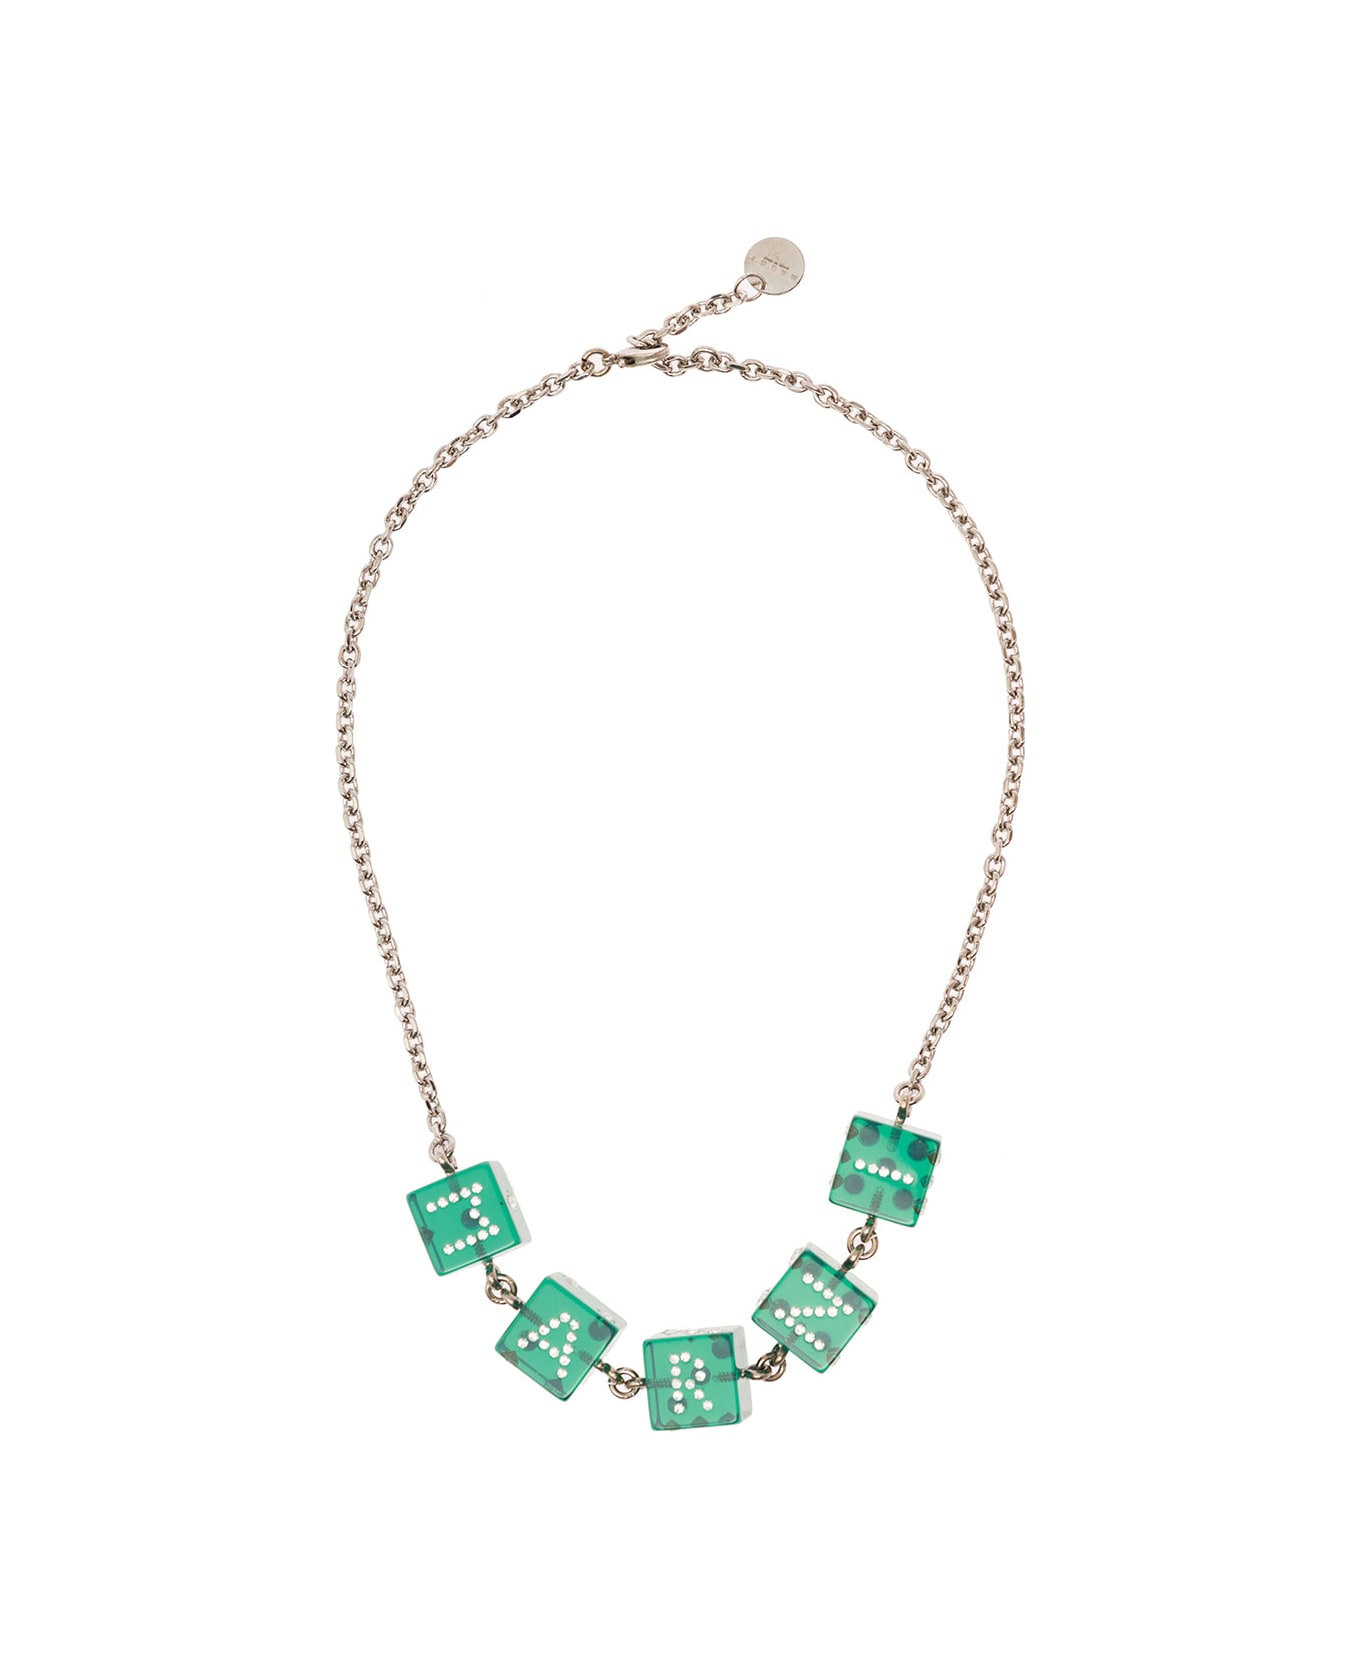 Marni Chain Necklace With Branded Dice-shaped Charms In Green Transparent Resin Woman - Argento/verde